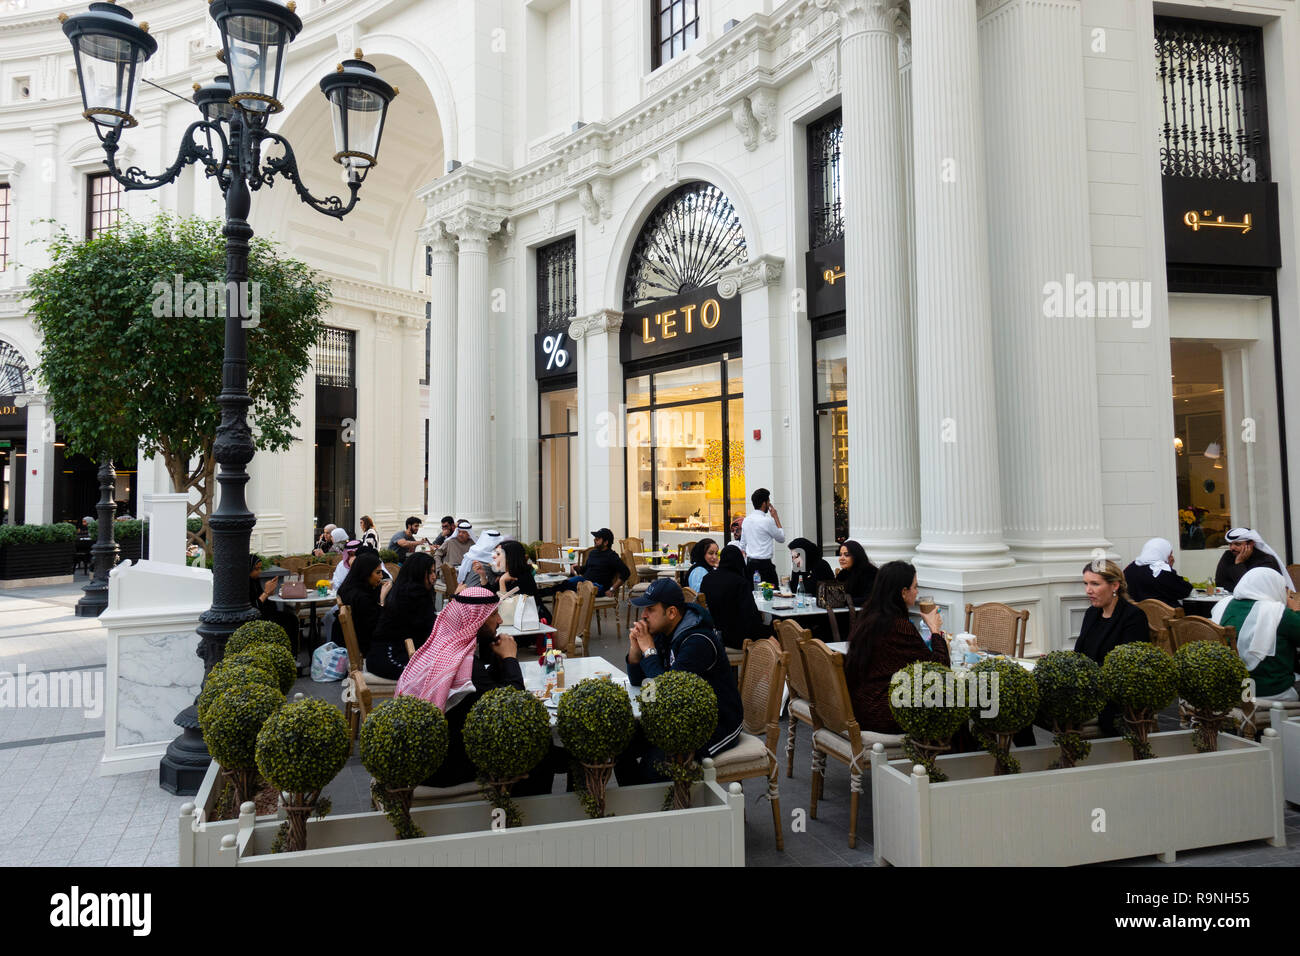 L'Eto cafe in The Avenues shopping mall in Kuwait City, Kuwait, Middle East Stock Photo